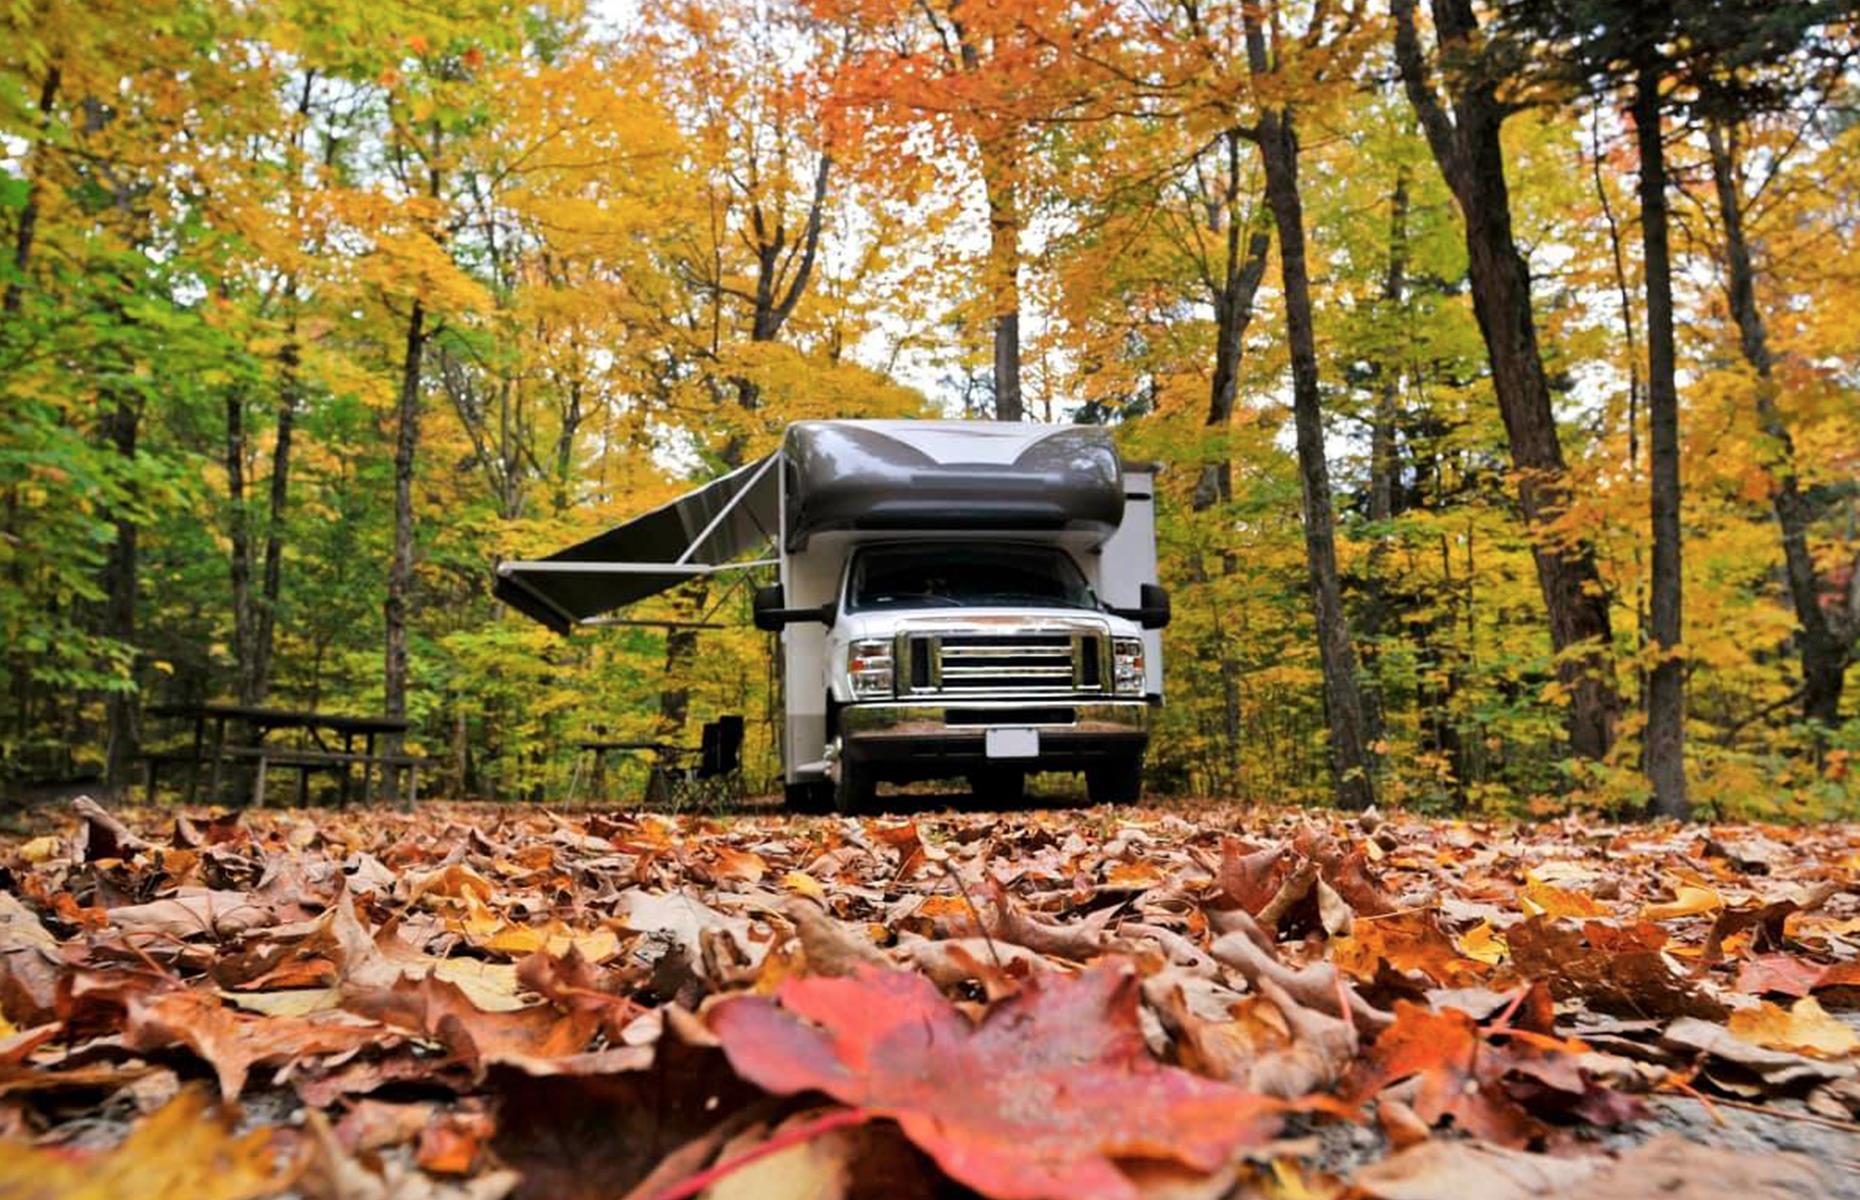 <p>The most coveted sites at <a href="http://www.aiacamping.com/">this laid-back RV resort</a> gaze across the Apostle Islands National Lakeshore, a wild scattering of islets, coves and tree-topped cliffs on the edge of Lake Superior in Wisconsin. Others are in wooded clearings, so tucked away they could be in the middle of nowhere. Cruises and kayak tours around the islands and sea caves depart from a beach just a mile away.</p>